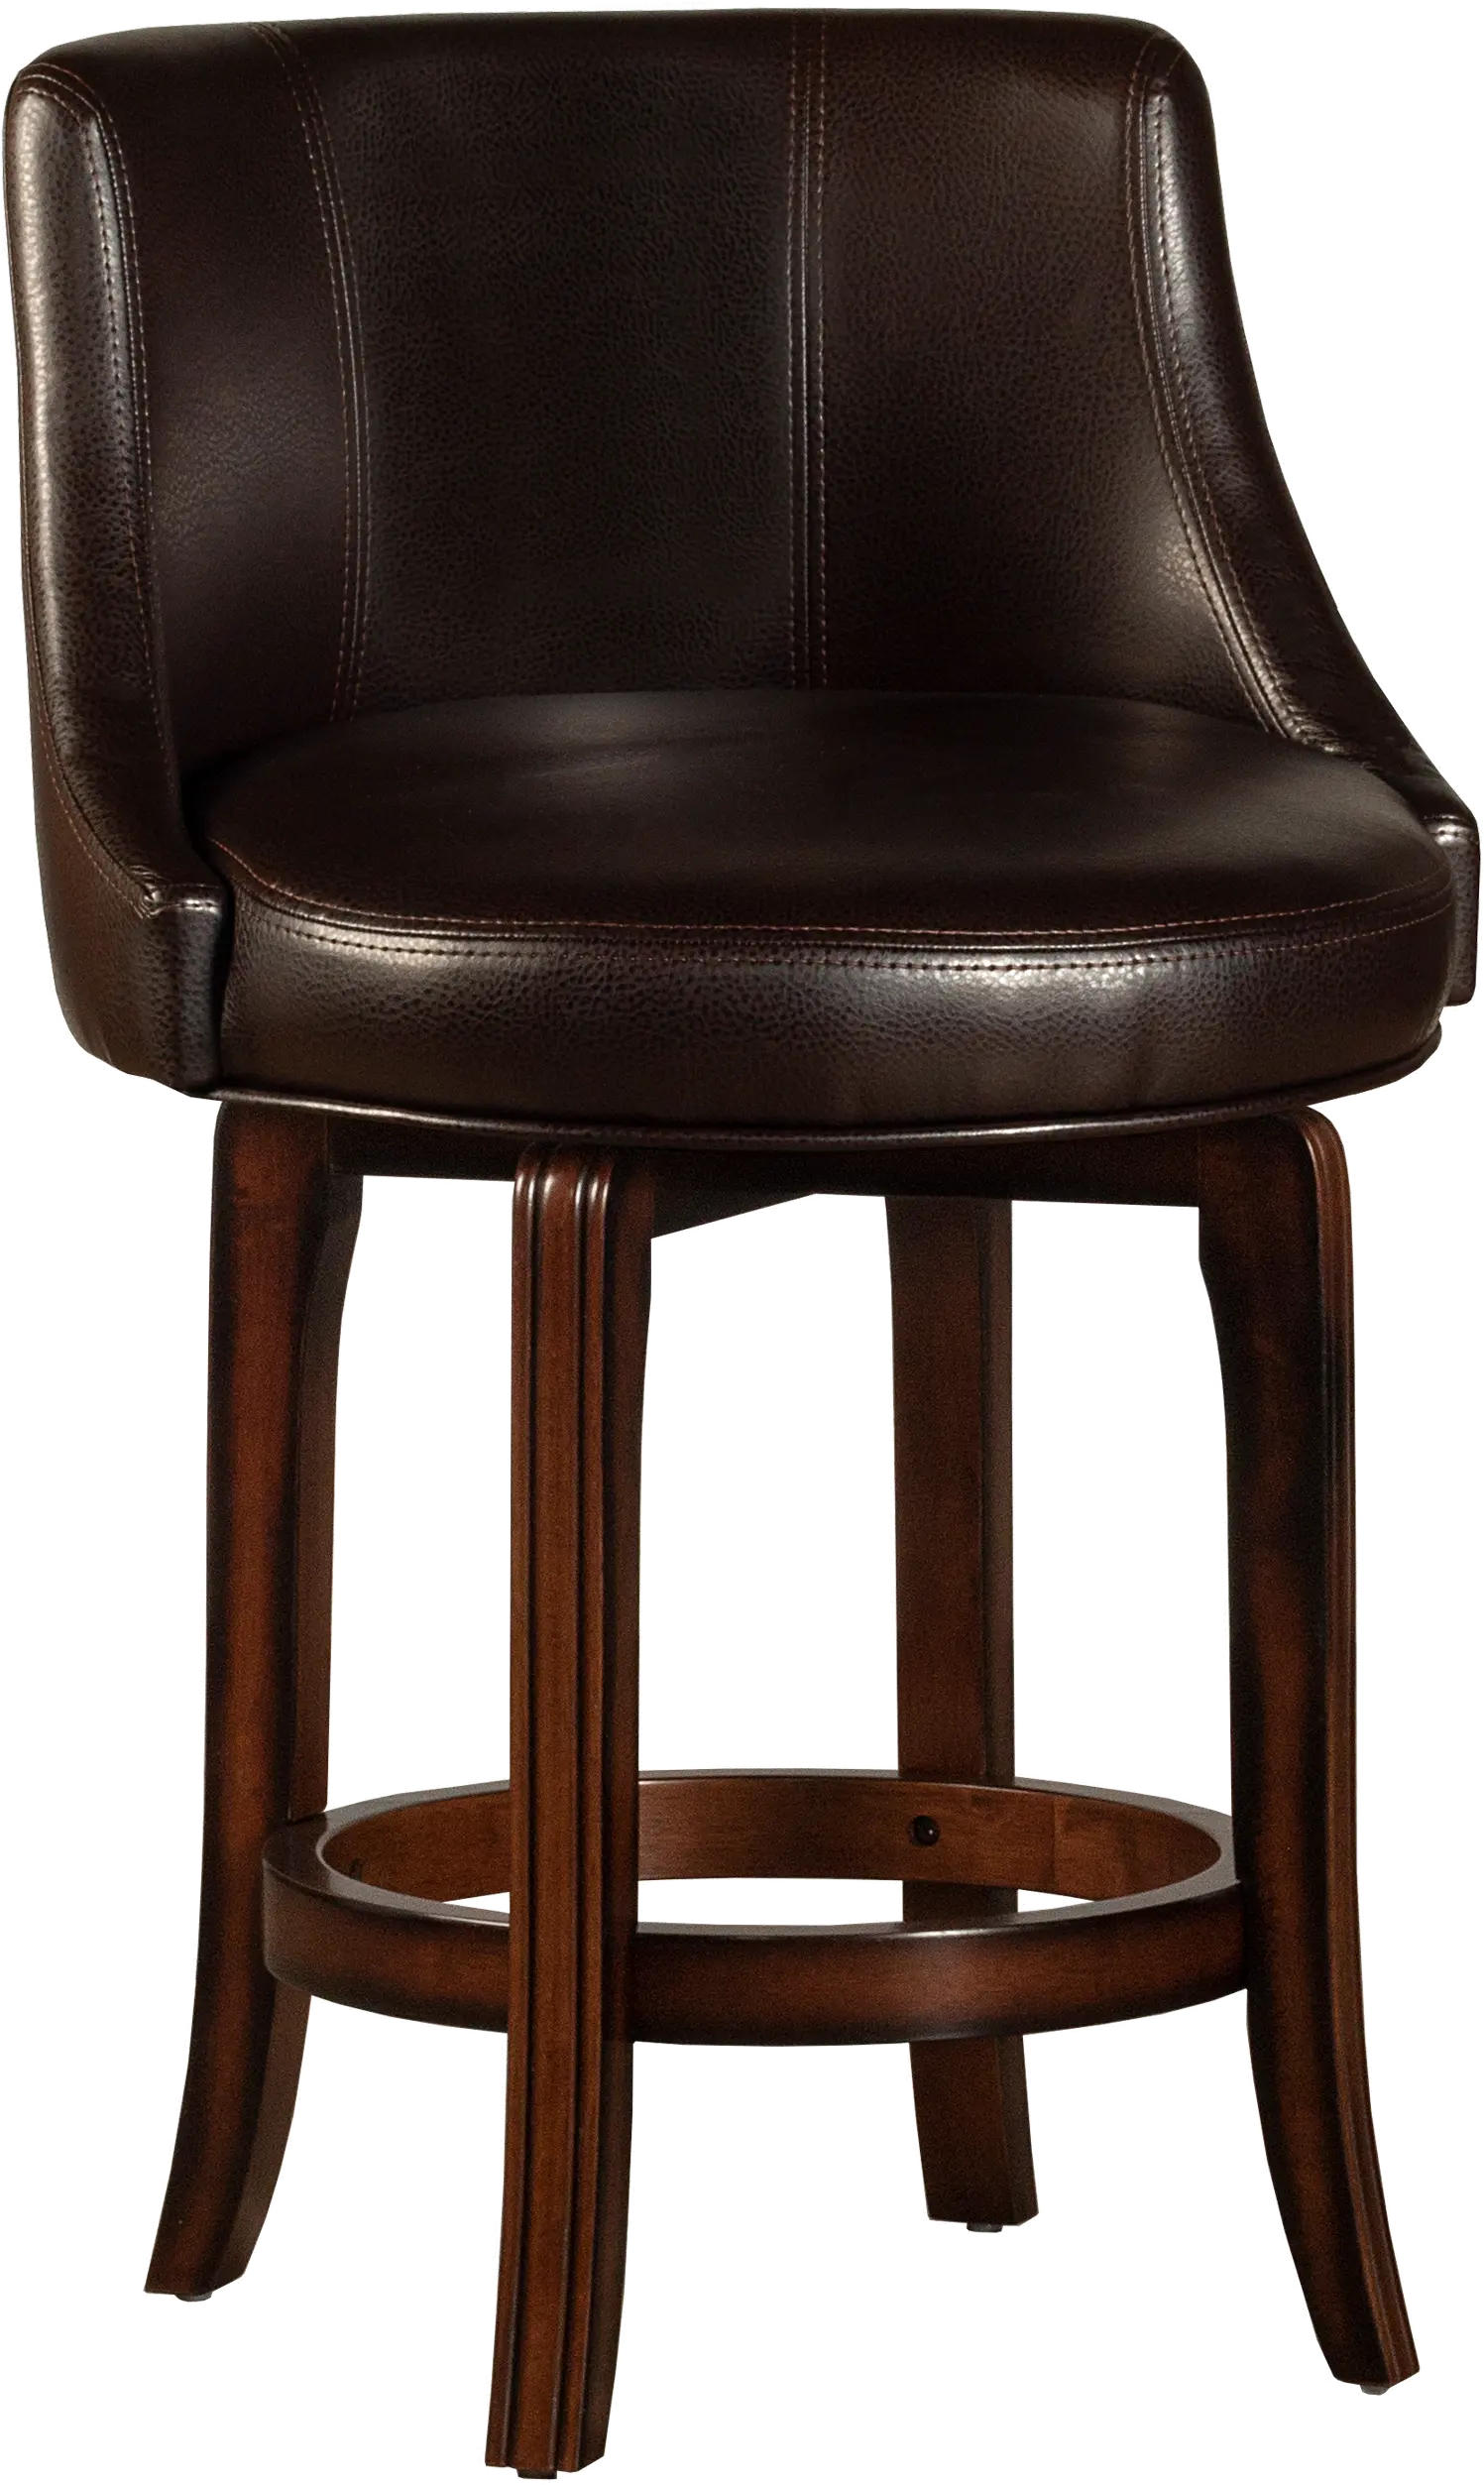 Napa Valley Wood and Upholstered Counter Height Swivel Stool